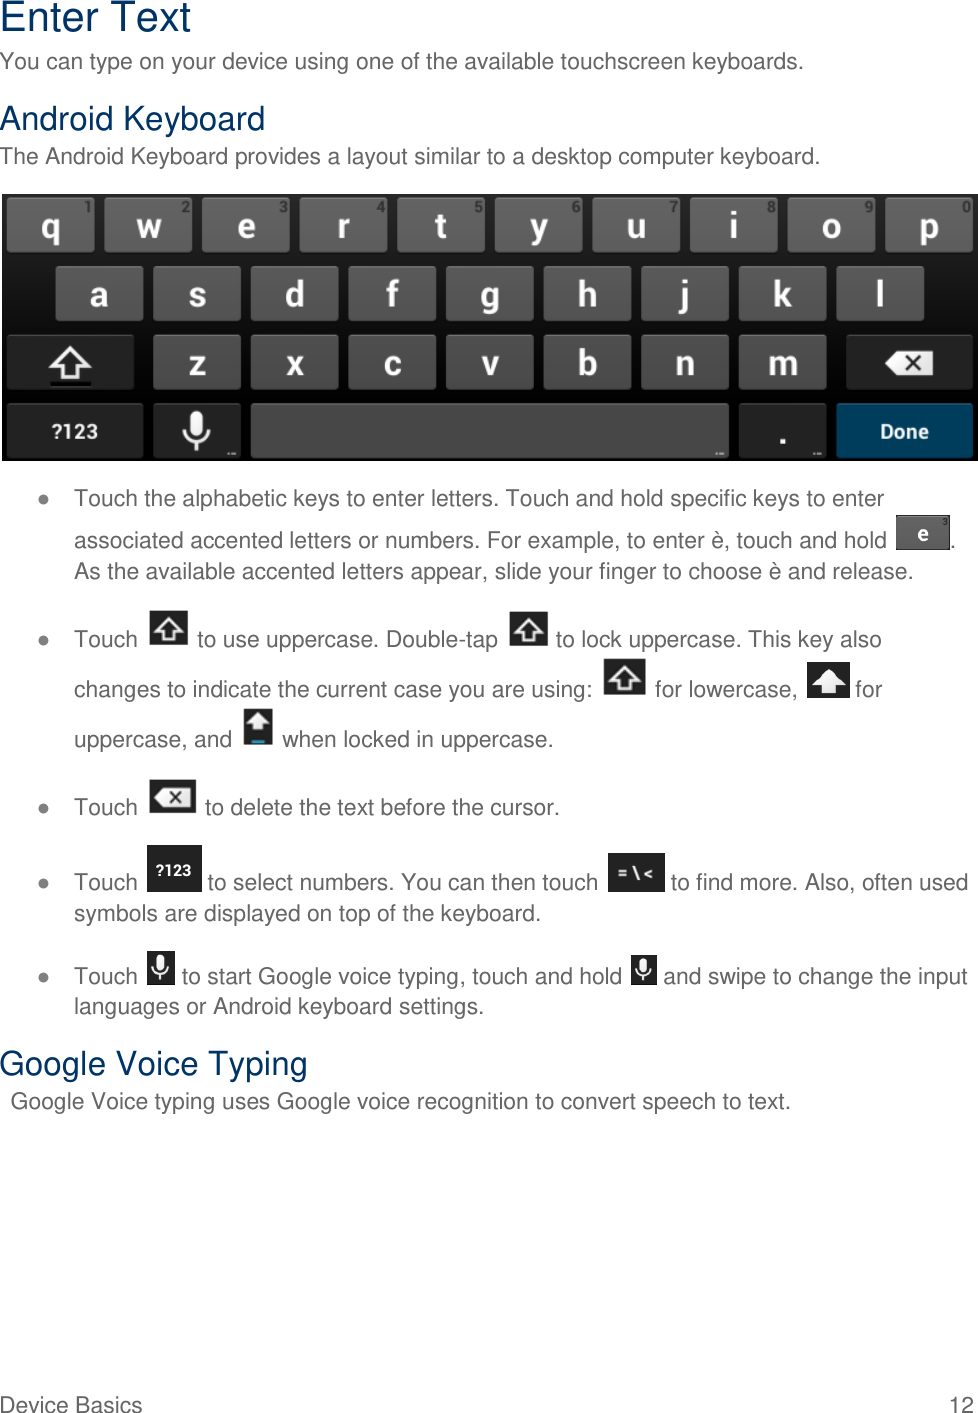  Device Basics  12 Enter Text You can type on your device using one of the available touchscreen keyboards. Android Keyboard  The Android Keyboard provides a layout similar to a desktop computer keyboard.  ● Touch the alphabetic keys to enter letters. Touch and hold specific keys to enter associated accented letters or numbers. For example, to enter è, touch and hold  . As the available accented letters appear, slide your finger to choose è and release. ● Touch   to use uppercase. Double-tap   to lock uppercase. This key also changes to indicate the current case you are using:   for lowercase,   for uppercase, and   when locked in uppercase. ● Touch   to delete the text before the cursor. ● Touch   to select numbers. You can then touch   to find more. Also, often used symbols are displayed on top of the keyboard.  ● Touch   to start Google voice typing, touch and hold   and swipe to change the input languages or Android keyboard settings. Google Voice Typing Google Voice typing uses Google voice recognition to convert speech to text. 